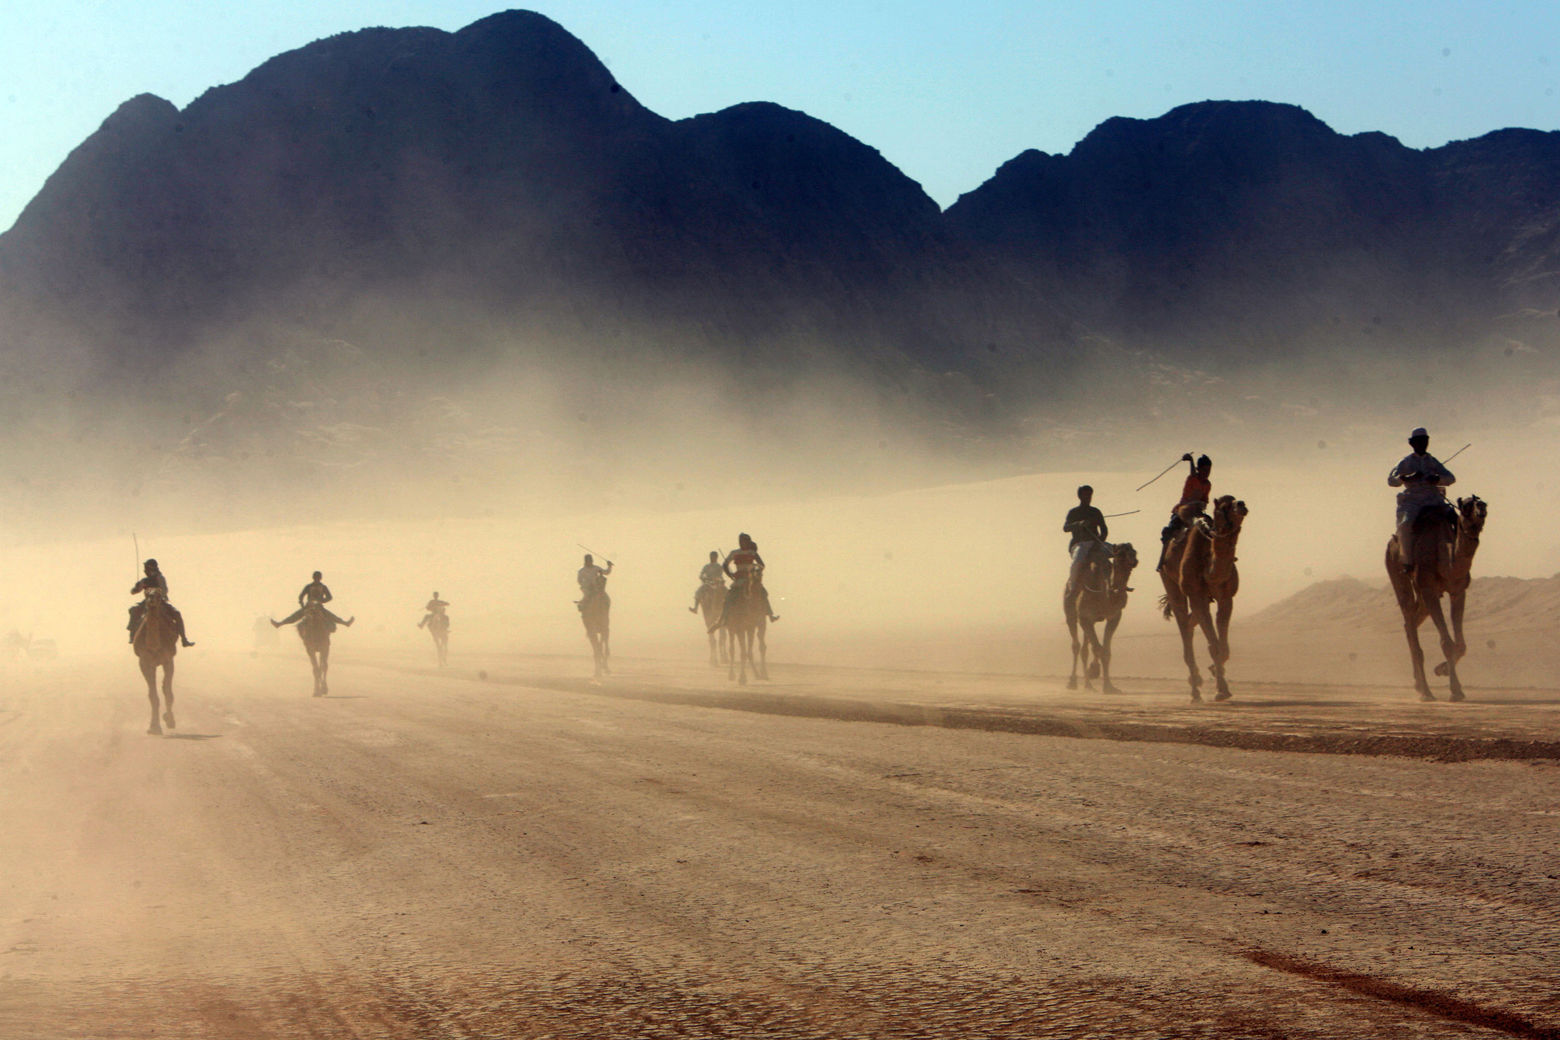 WADI RUM, JORDAN- DECEMBER 14: Beduins children ride their camels during the annual camel race in the desert of Wadi Rum in the south of Jordan December 14, 2007, where competitors from Saudi Arabia, Egypt and Jordan race for 9km in the traditional beduins' sport. (Photo by Salah Malkawi/ Getty Images)